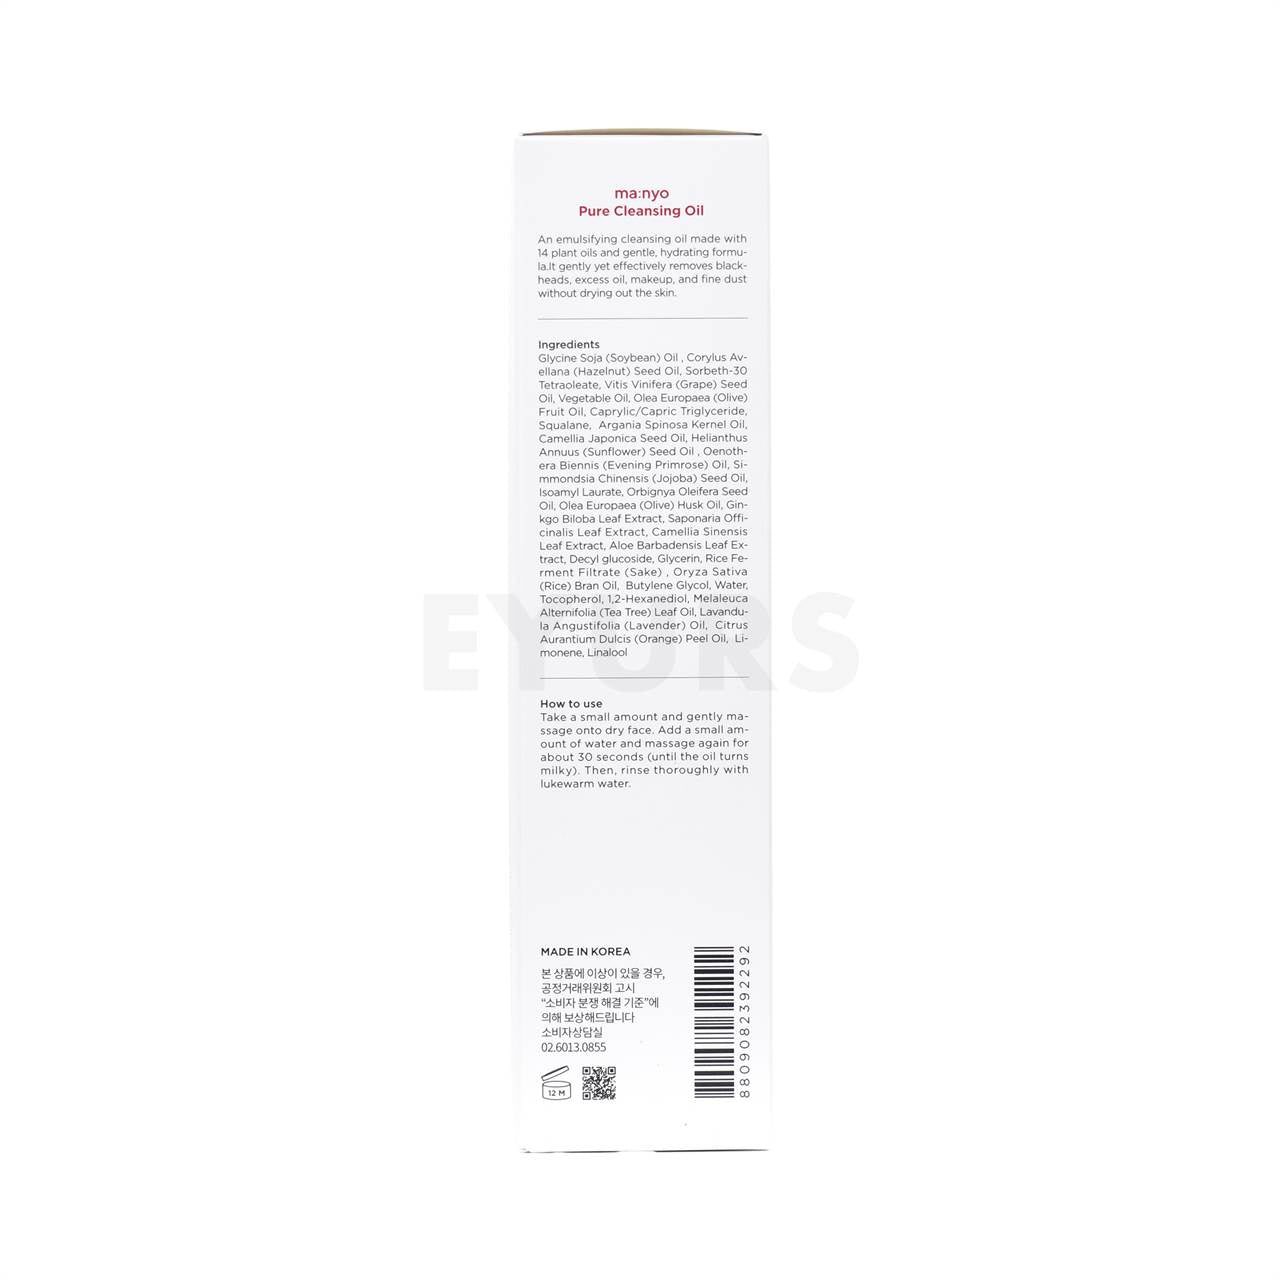 manyo pure cleansing oil back side packaging